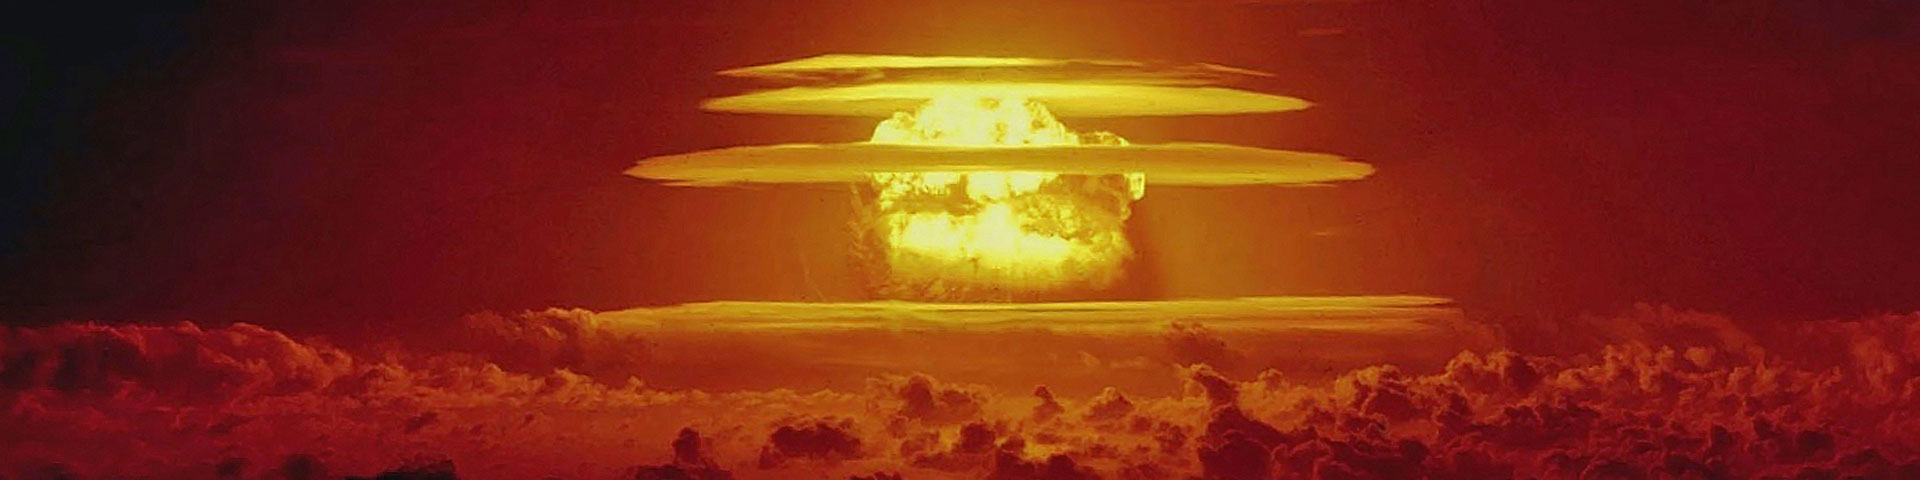 A nuclear mushroom cloud rises through the atmosphere, glowing yellow against the orange sky.